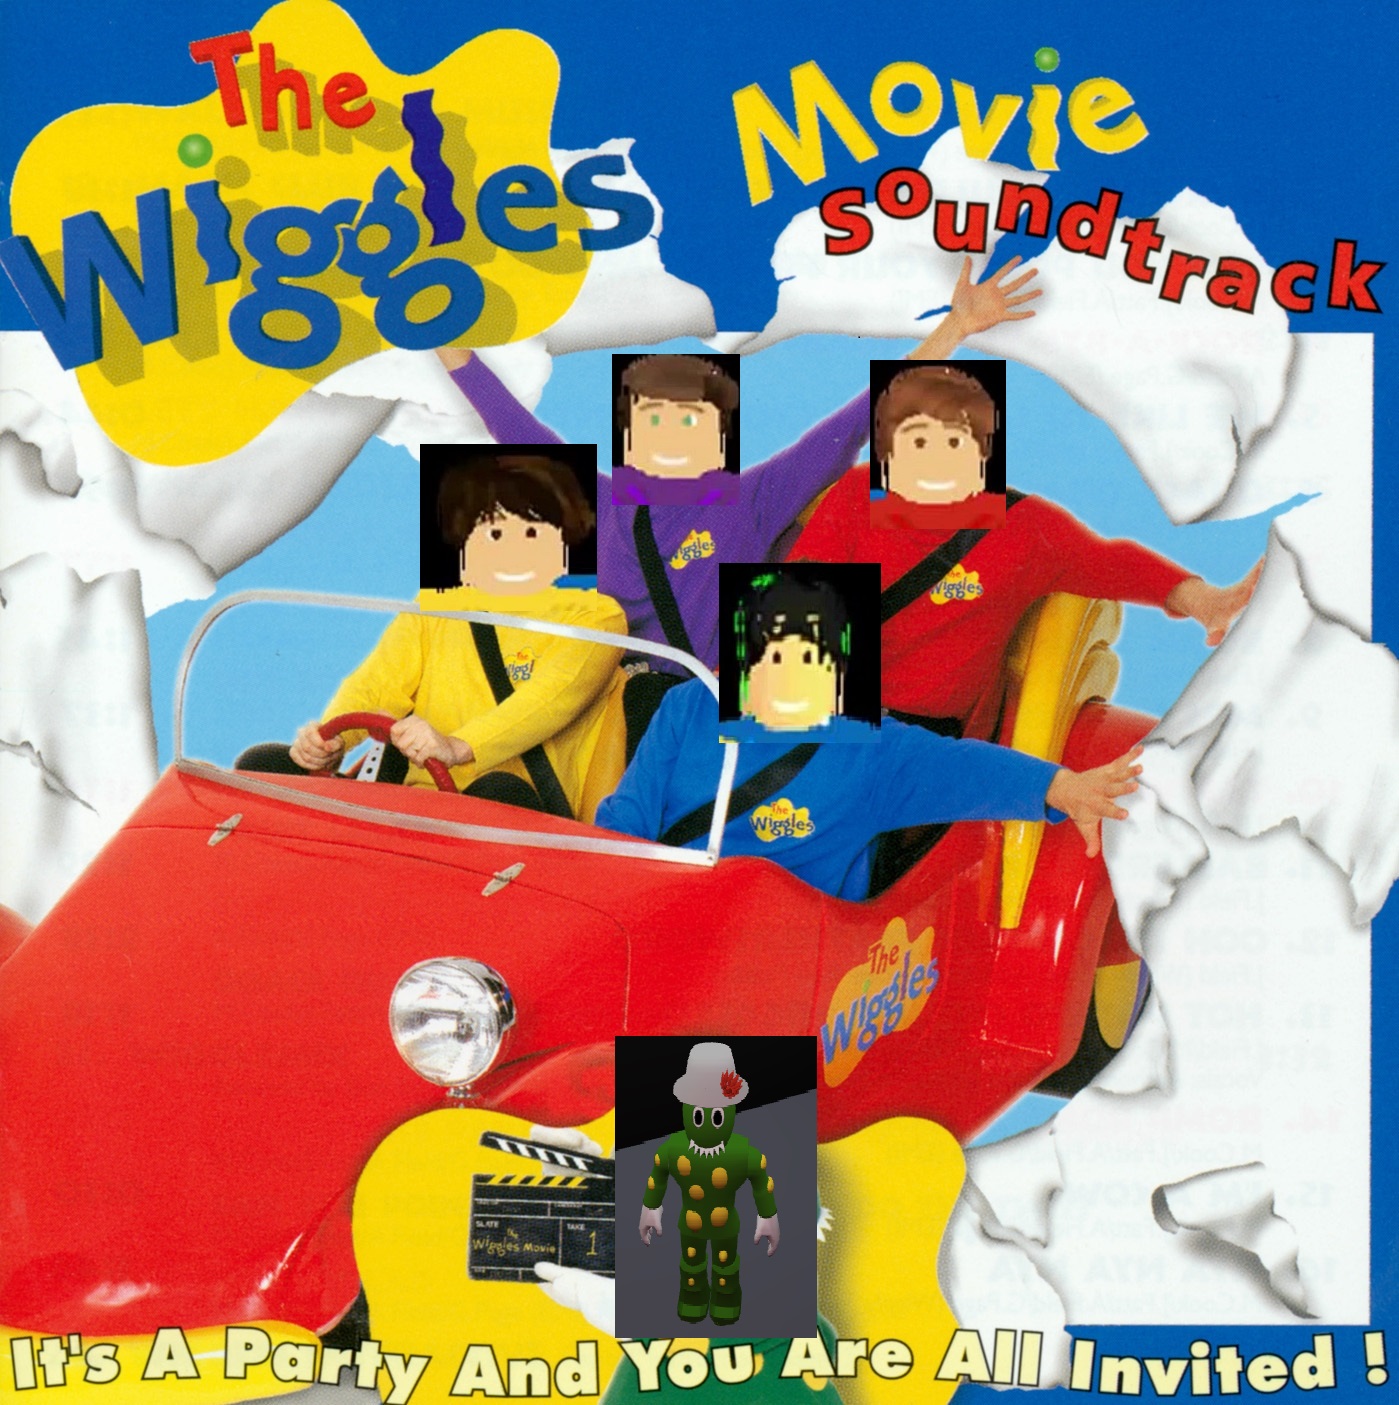 The Wiggles Roblox